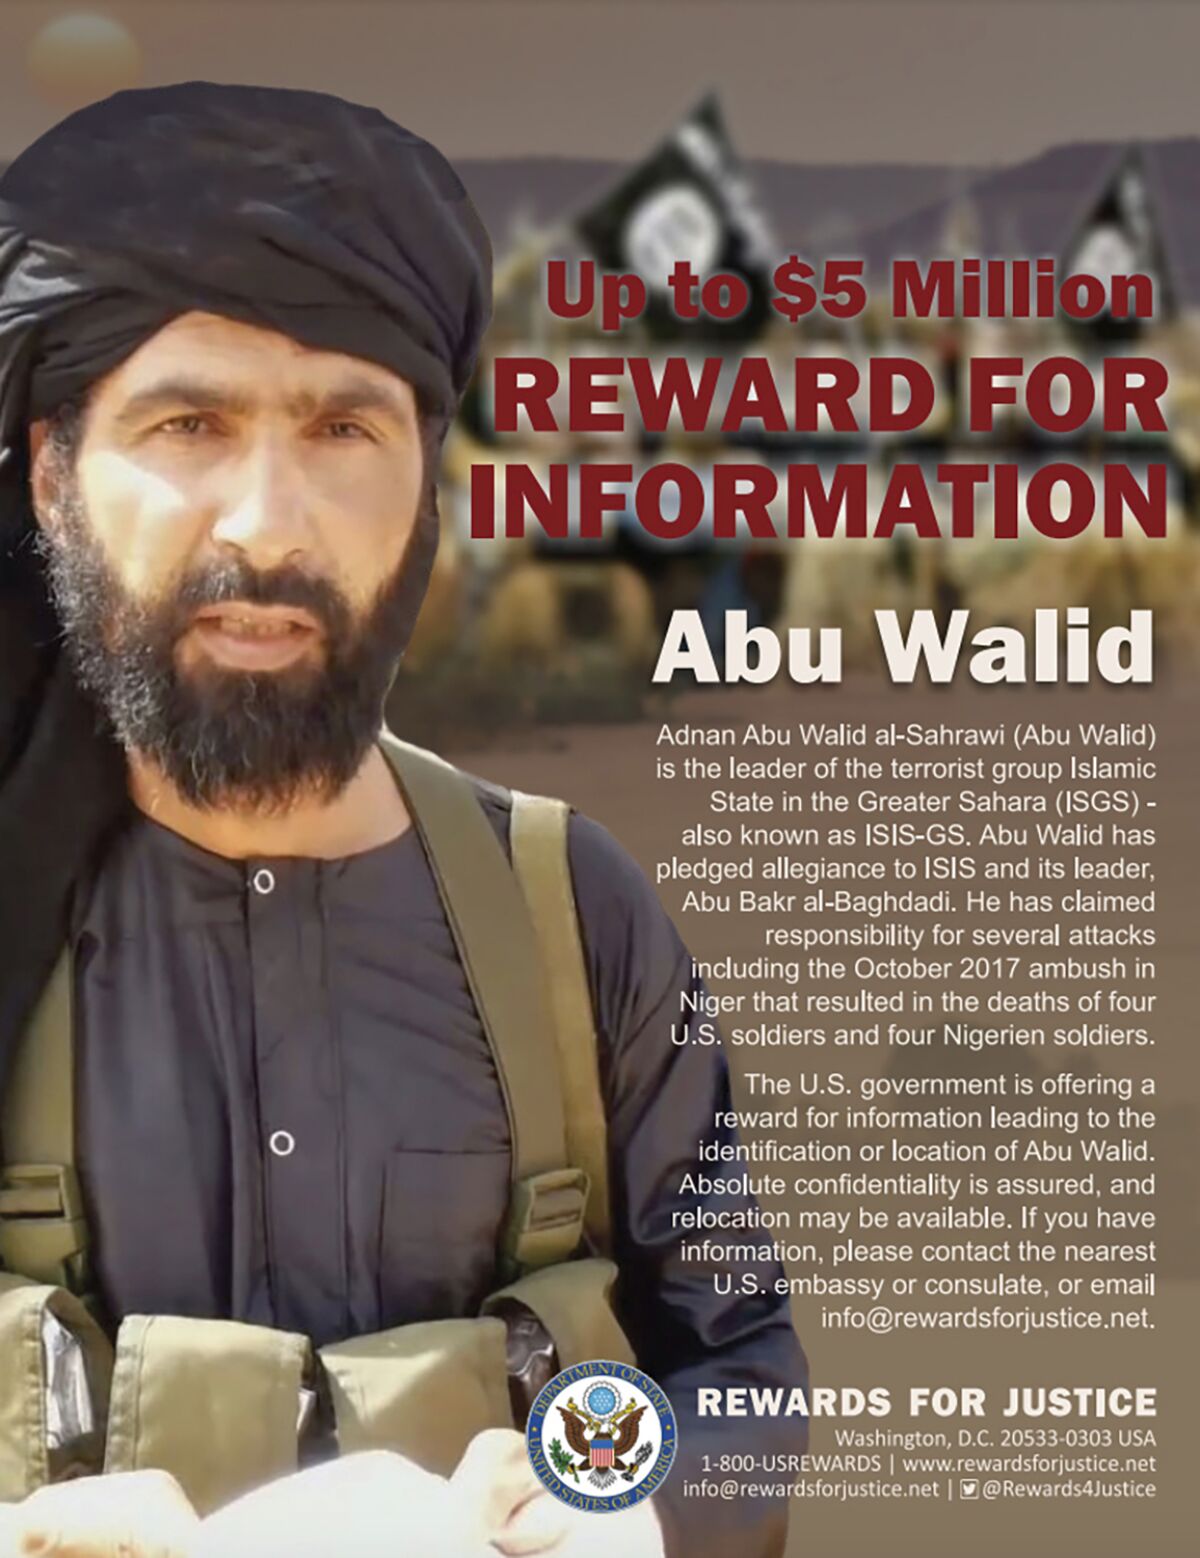 This undated image provided by Rewards For Justice shows a wanted posted of Adnan Abu Walid al-Sahrawi, the leader of Islamic State in the Greater Sahara. French President Emmanuel Macron announced the death of al-Sahrawi Wednesday, Sept. 15, 2021, calling the killing “a major success” for the French military after more than eight years fighting extremists in the Sahel. Macron tweeted that al-Sahrawi “was neutralized by French forces” but gave no further details. (Rewards For Justice via AP)